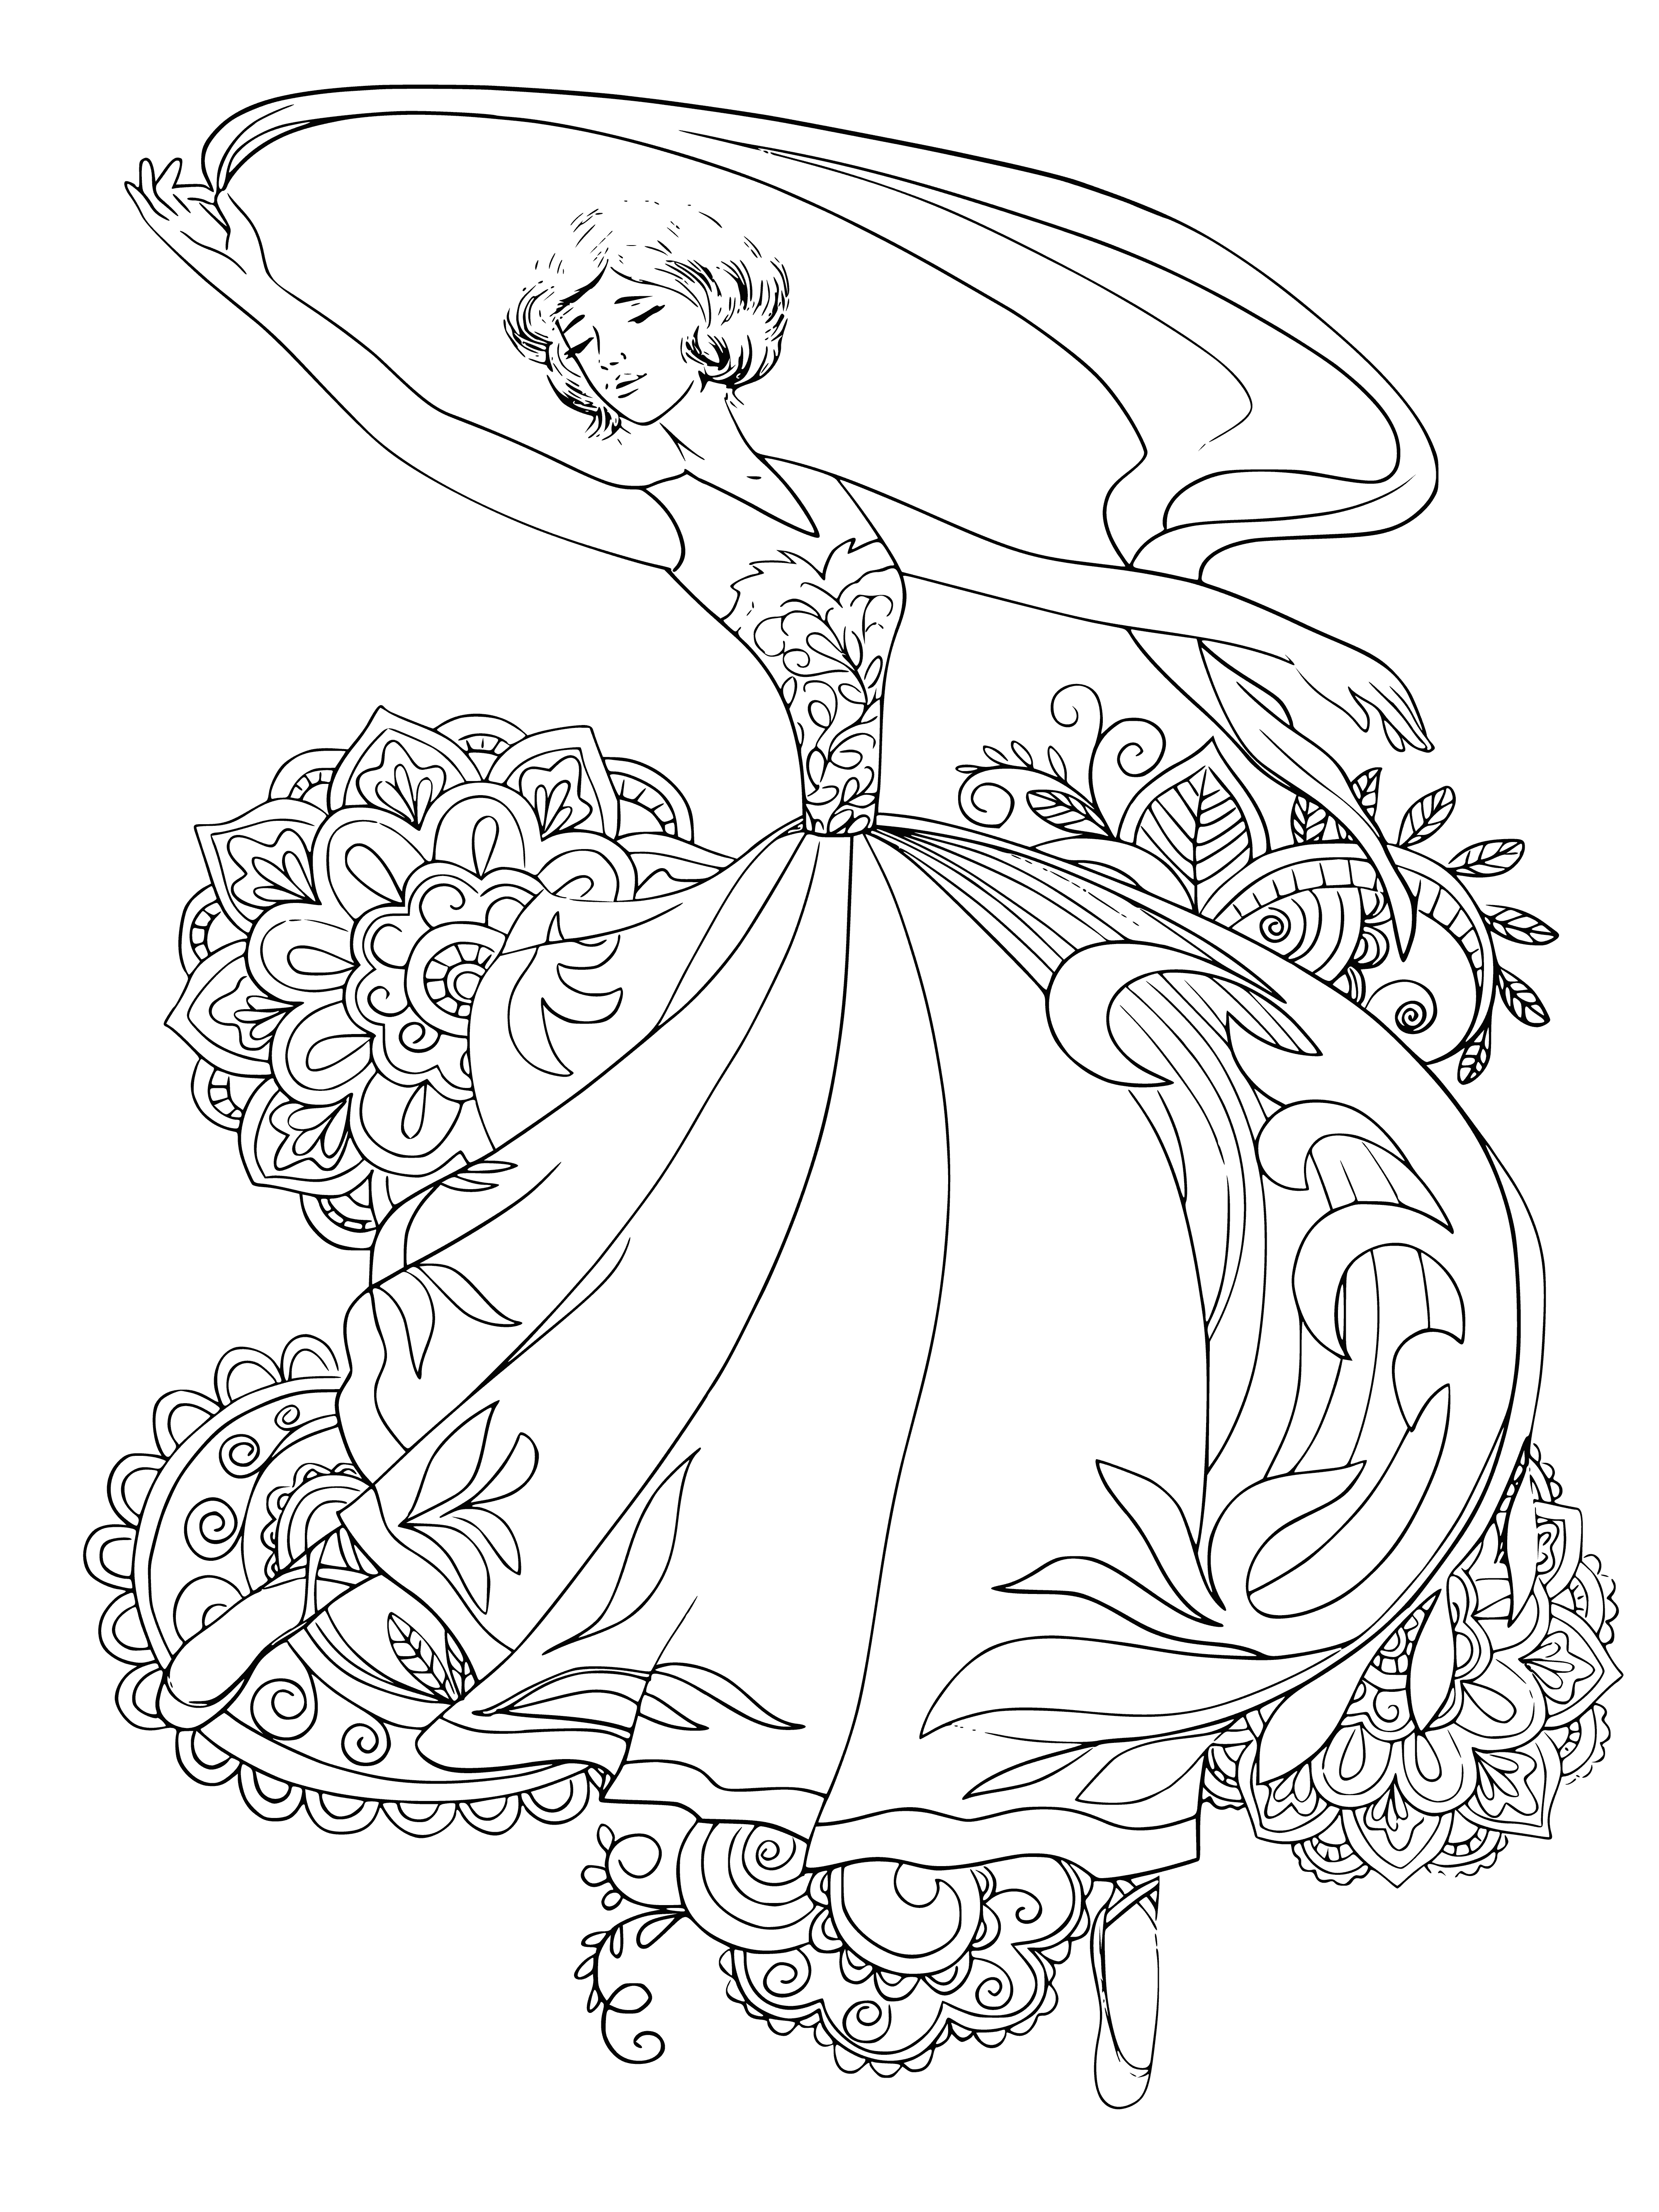 coloring page: Take a break and enjoy coloring a ballerina in a tutu, with one arm extended and leg raised, head tilted back, smiling.